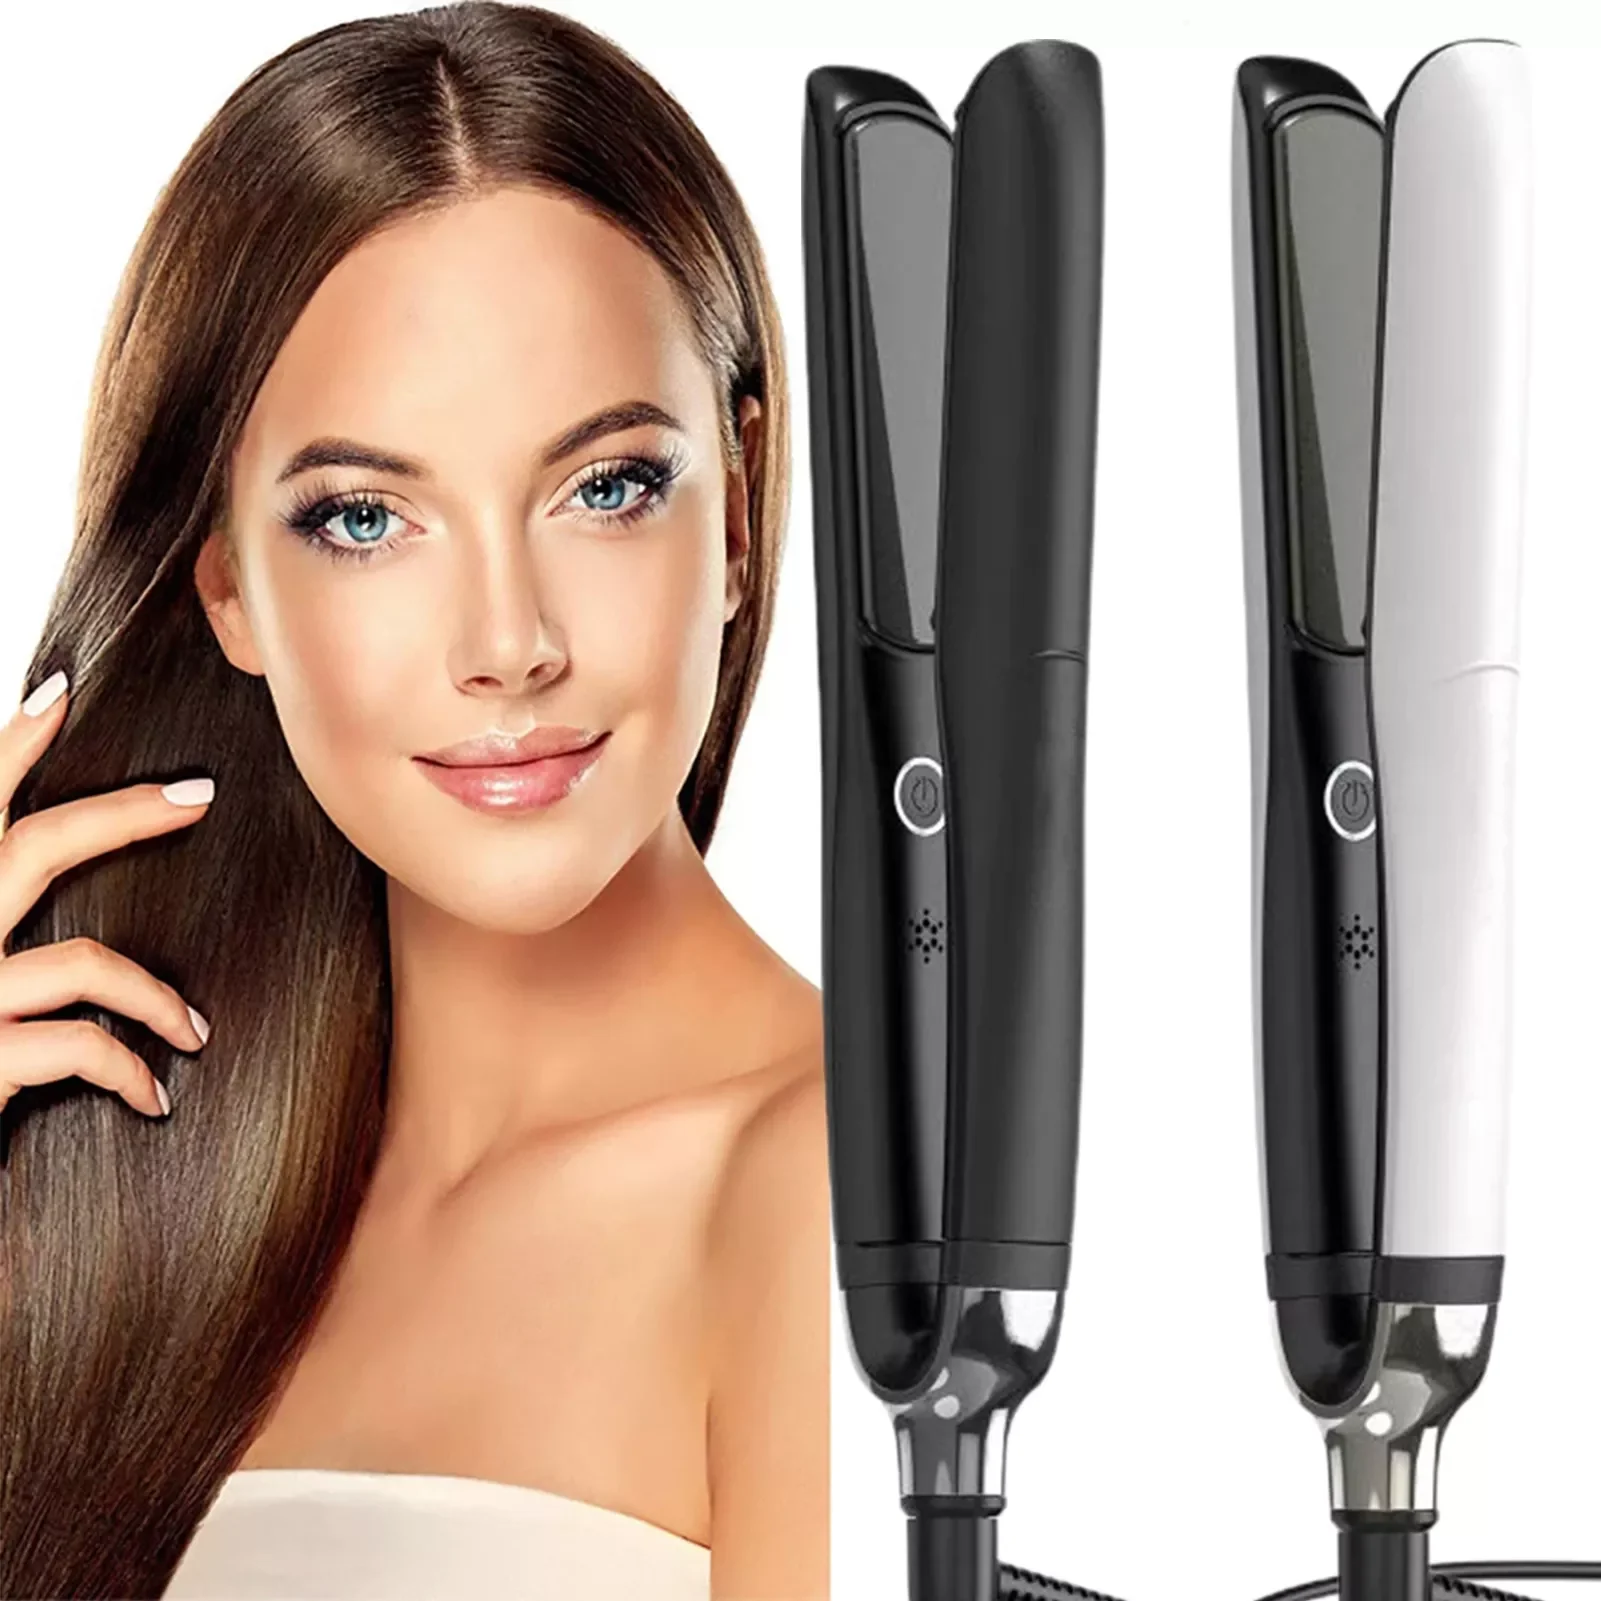 2 in 1 Hair Styler Heats Up Fast Hair Straightener Curler for Women No Hair Damage Hair Styling Tools Curling Hair Tool boucleur